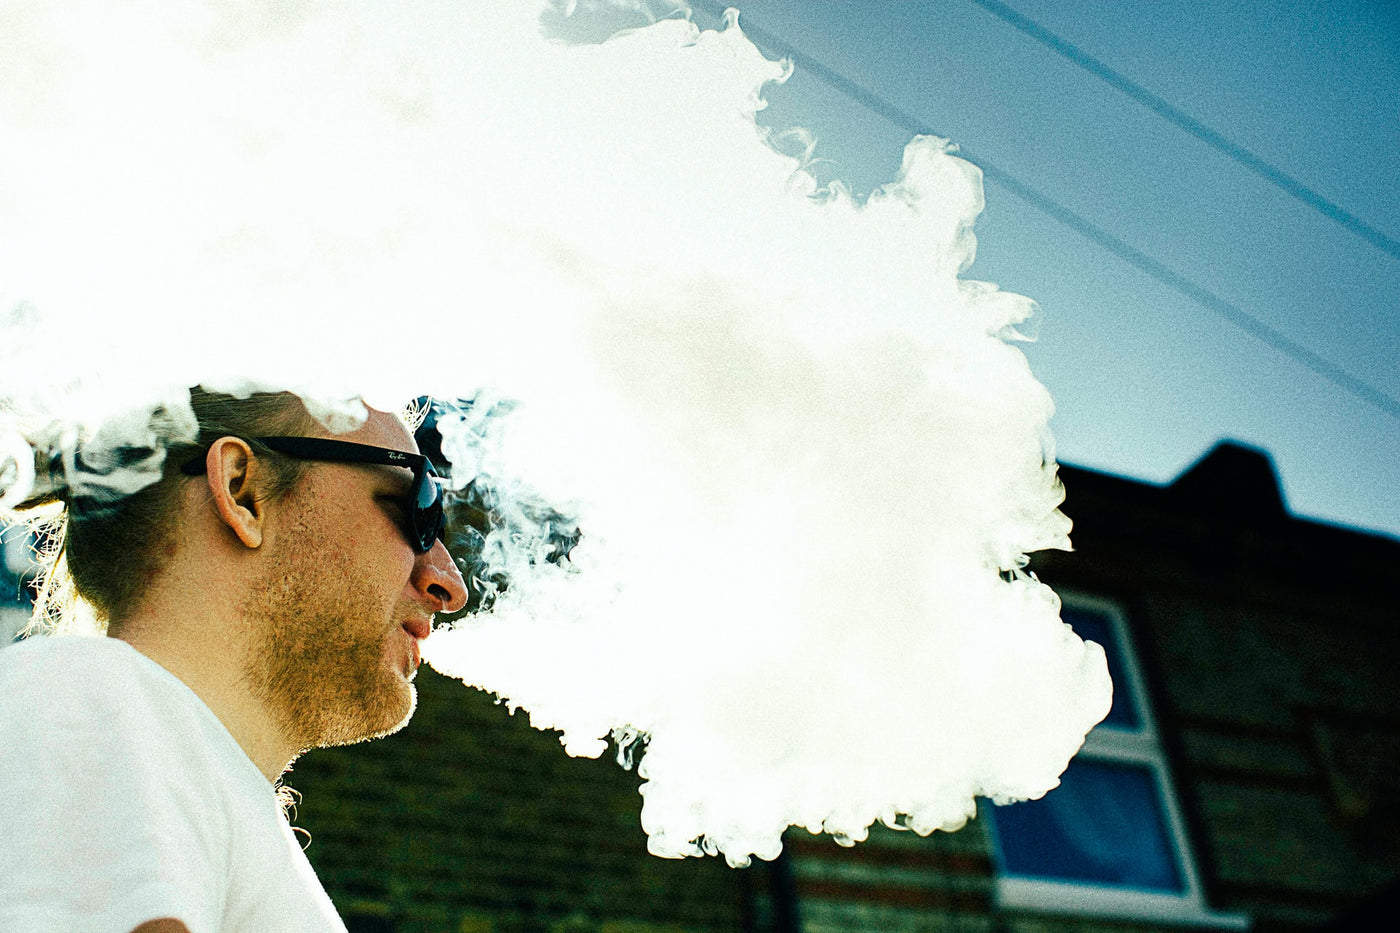 Does Your Vape Taste Burnt? Here's How to Fix The Problem